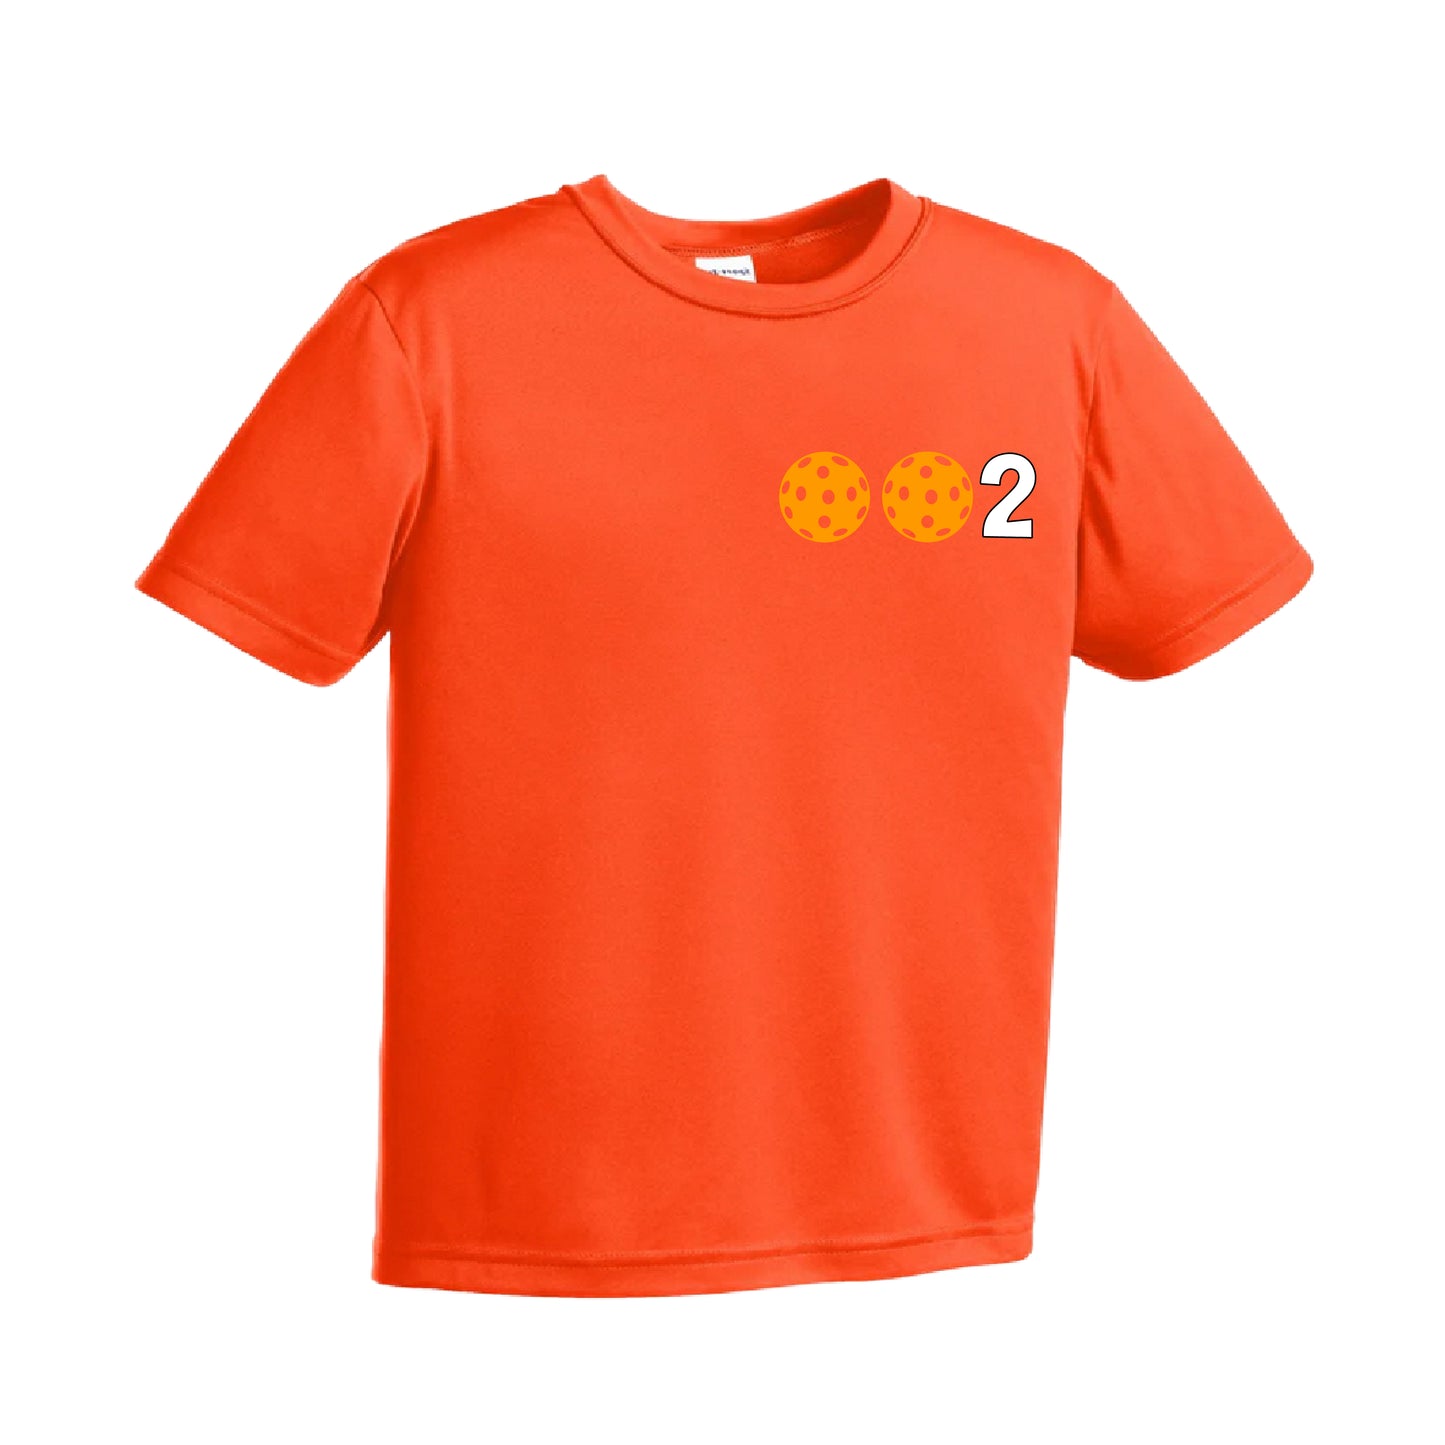 002 Pickleball (Ball Colors Cyan Red Orange) | Youth Short Sleeve Athletic Shirt | 100% Polyester